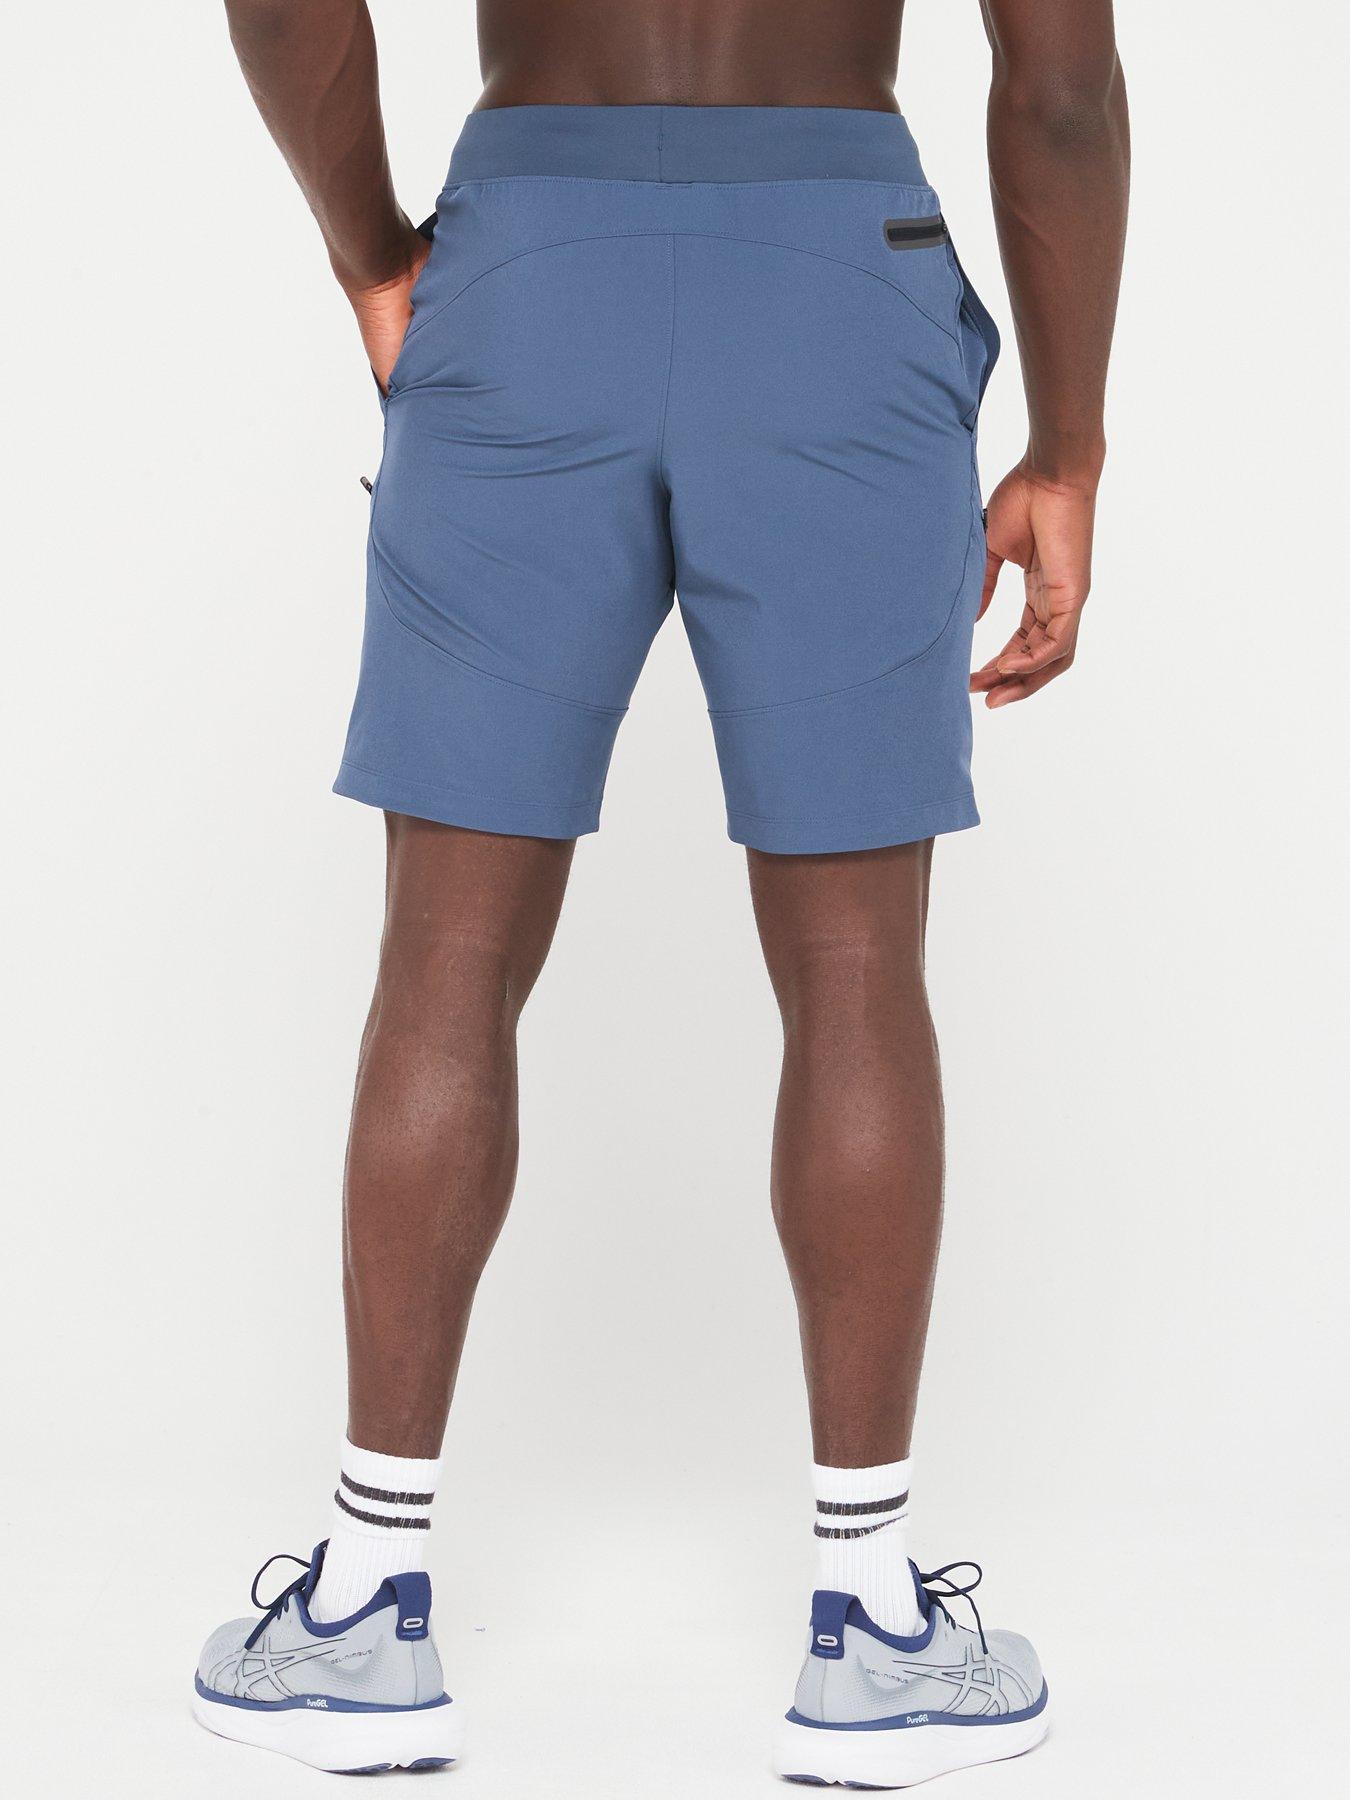 UNDER ARMOUR Mens Unstoppable Cargo Shorts - Grey/black